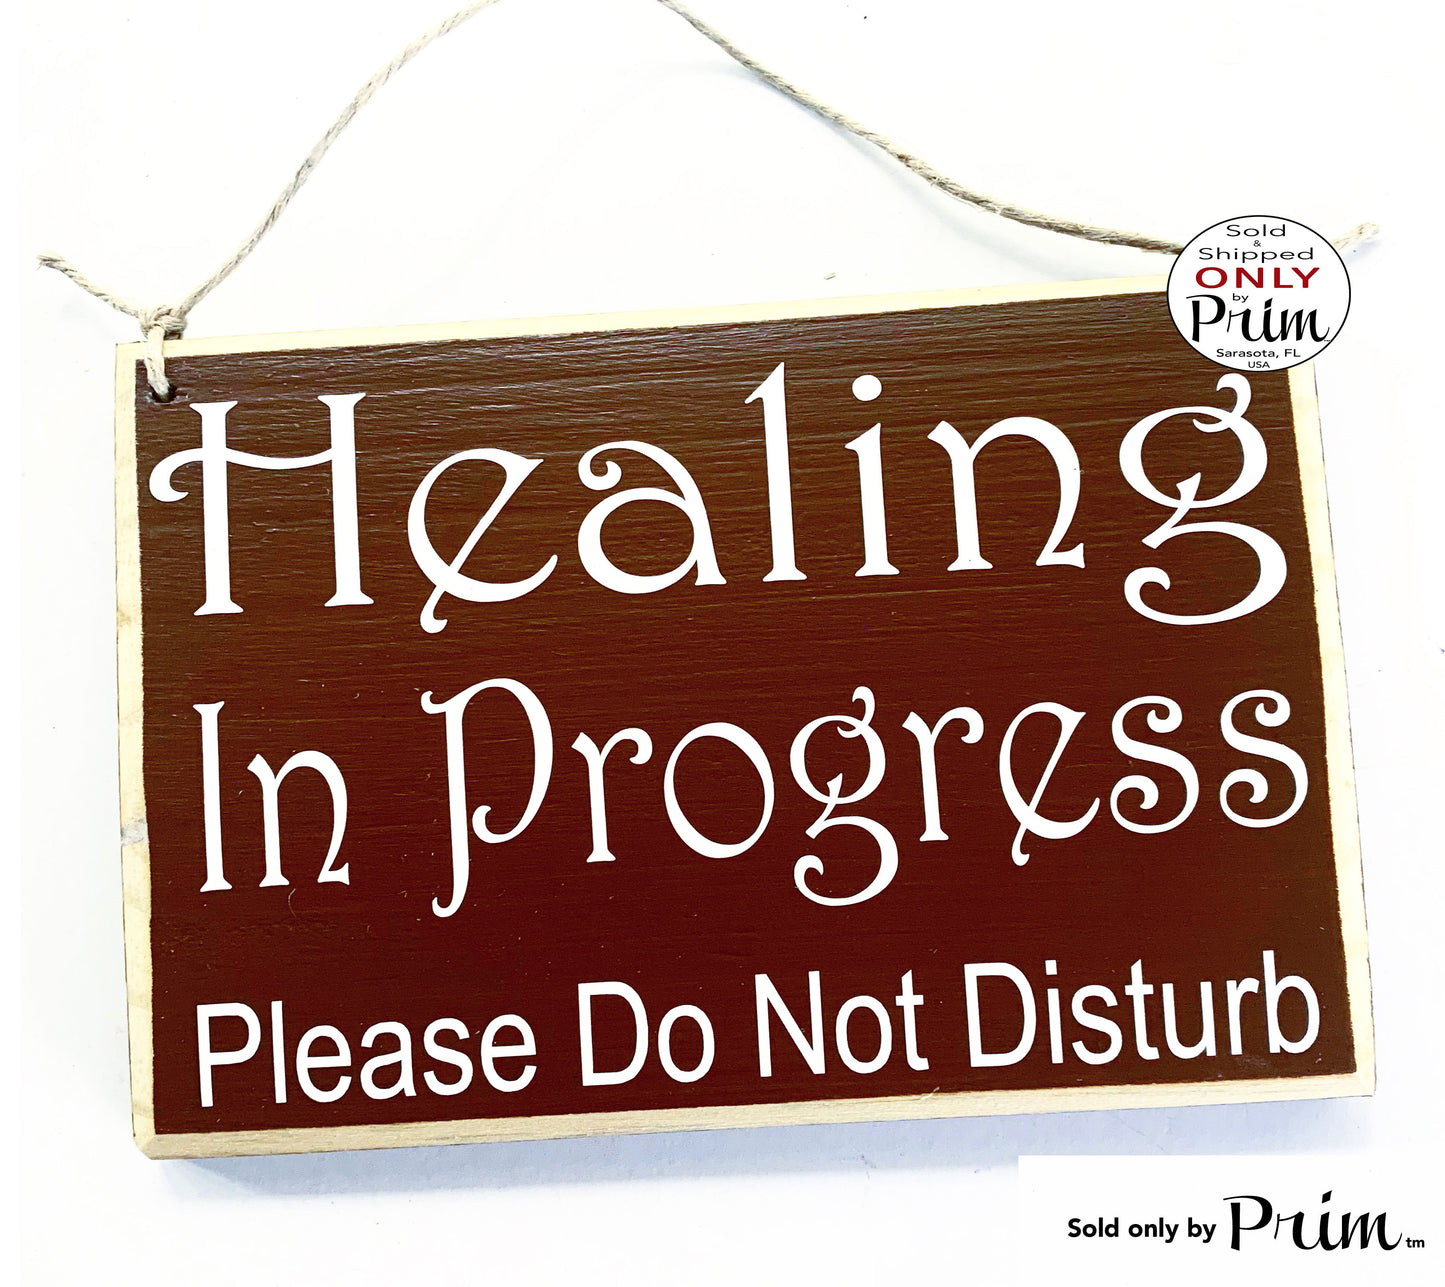 8x6 Healing In Progress Please Do Not Disturb Custom Wood Sign | Spa Salon In Session Treatment Office Door Therapy Room Wall Door Plaque Designs by Prim 